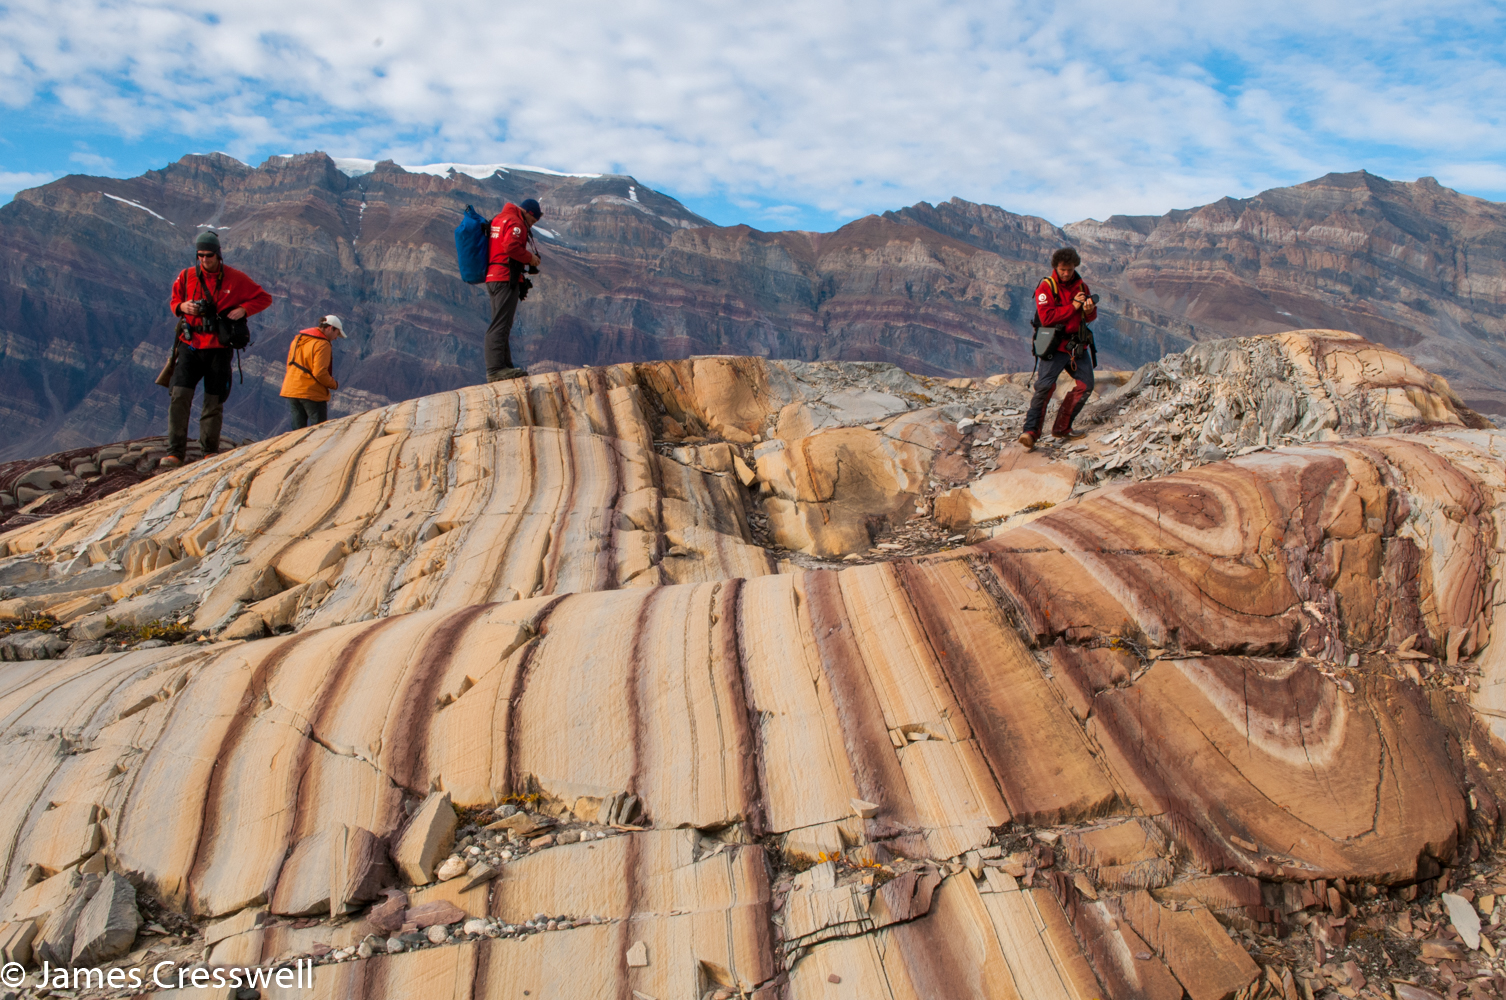 A photograph of people standing on stripy rocks taken in east Greenland on a PolarWorld Travel placed cruise